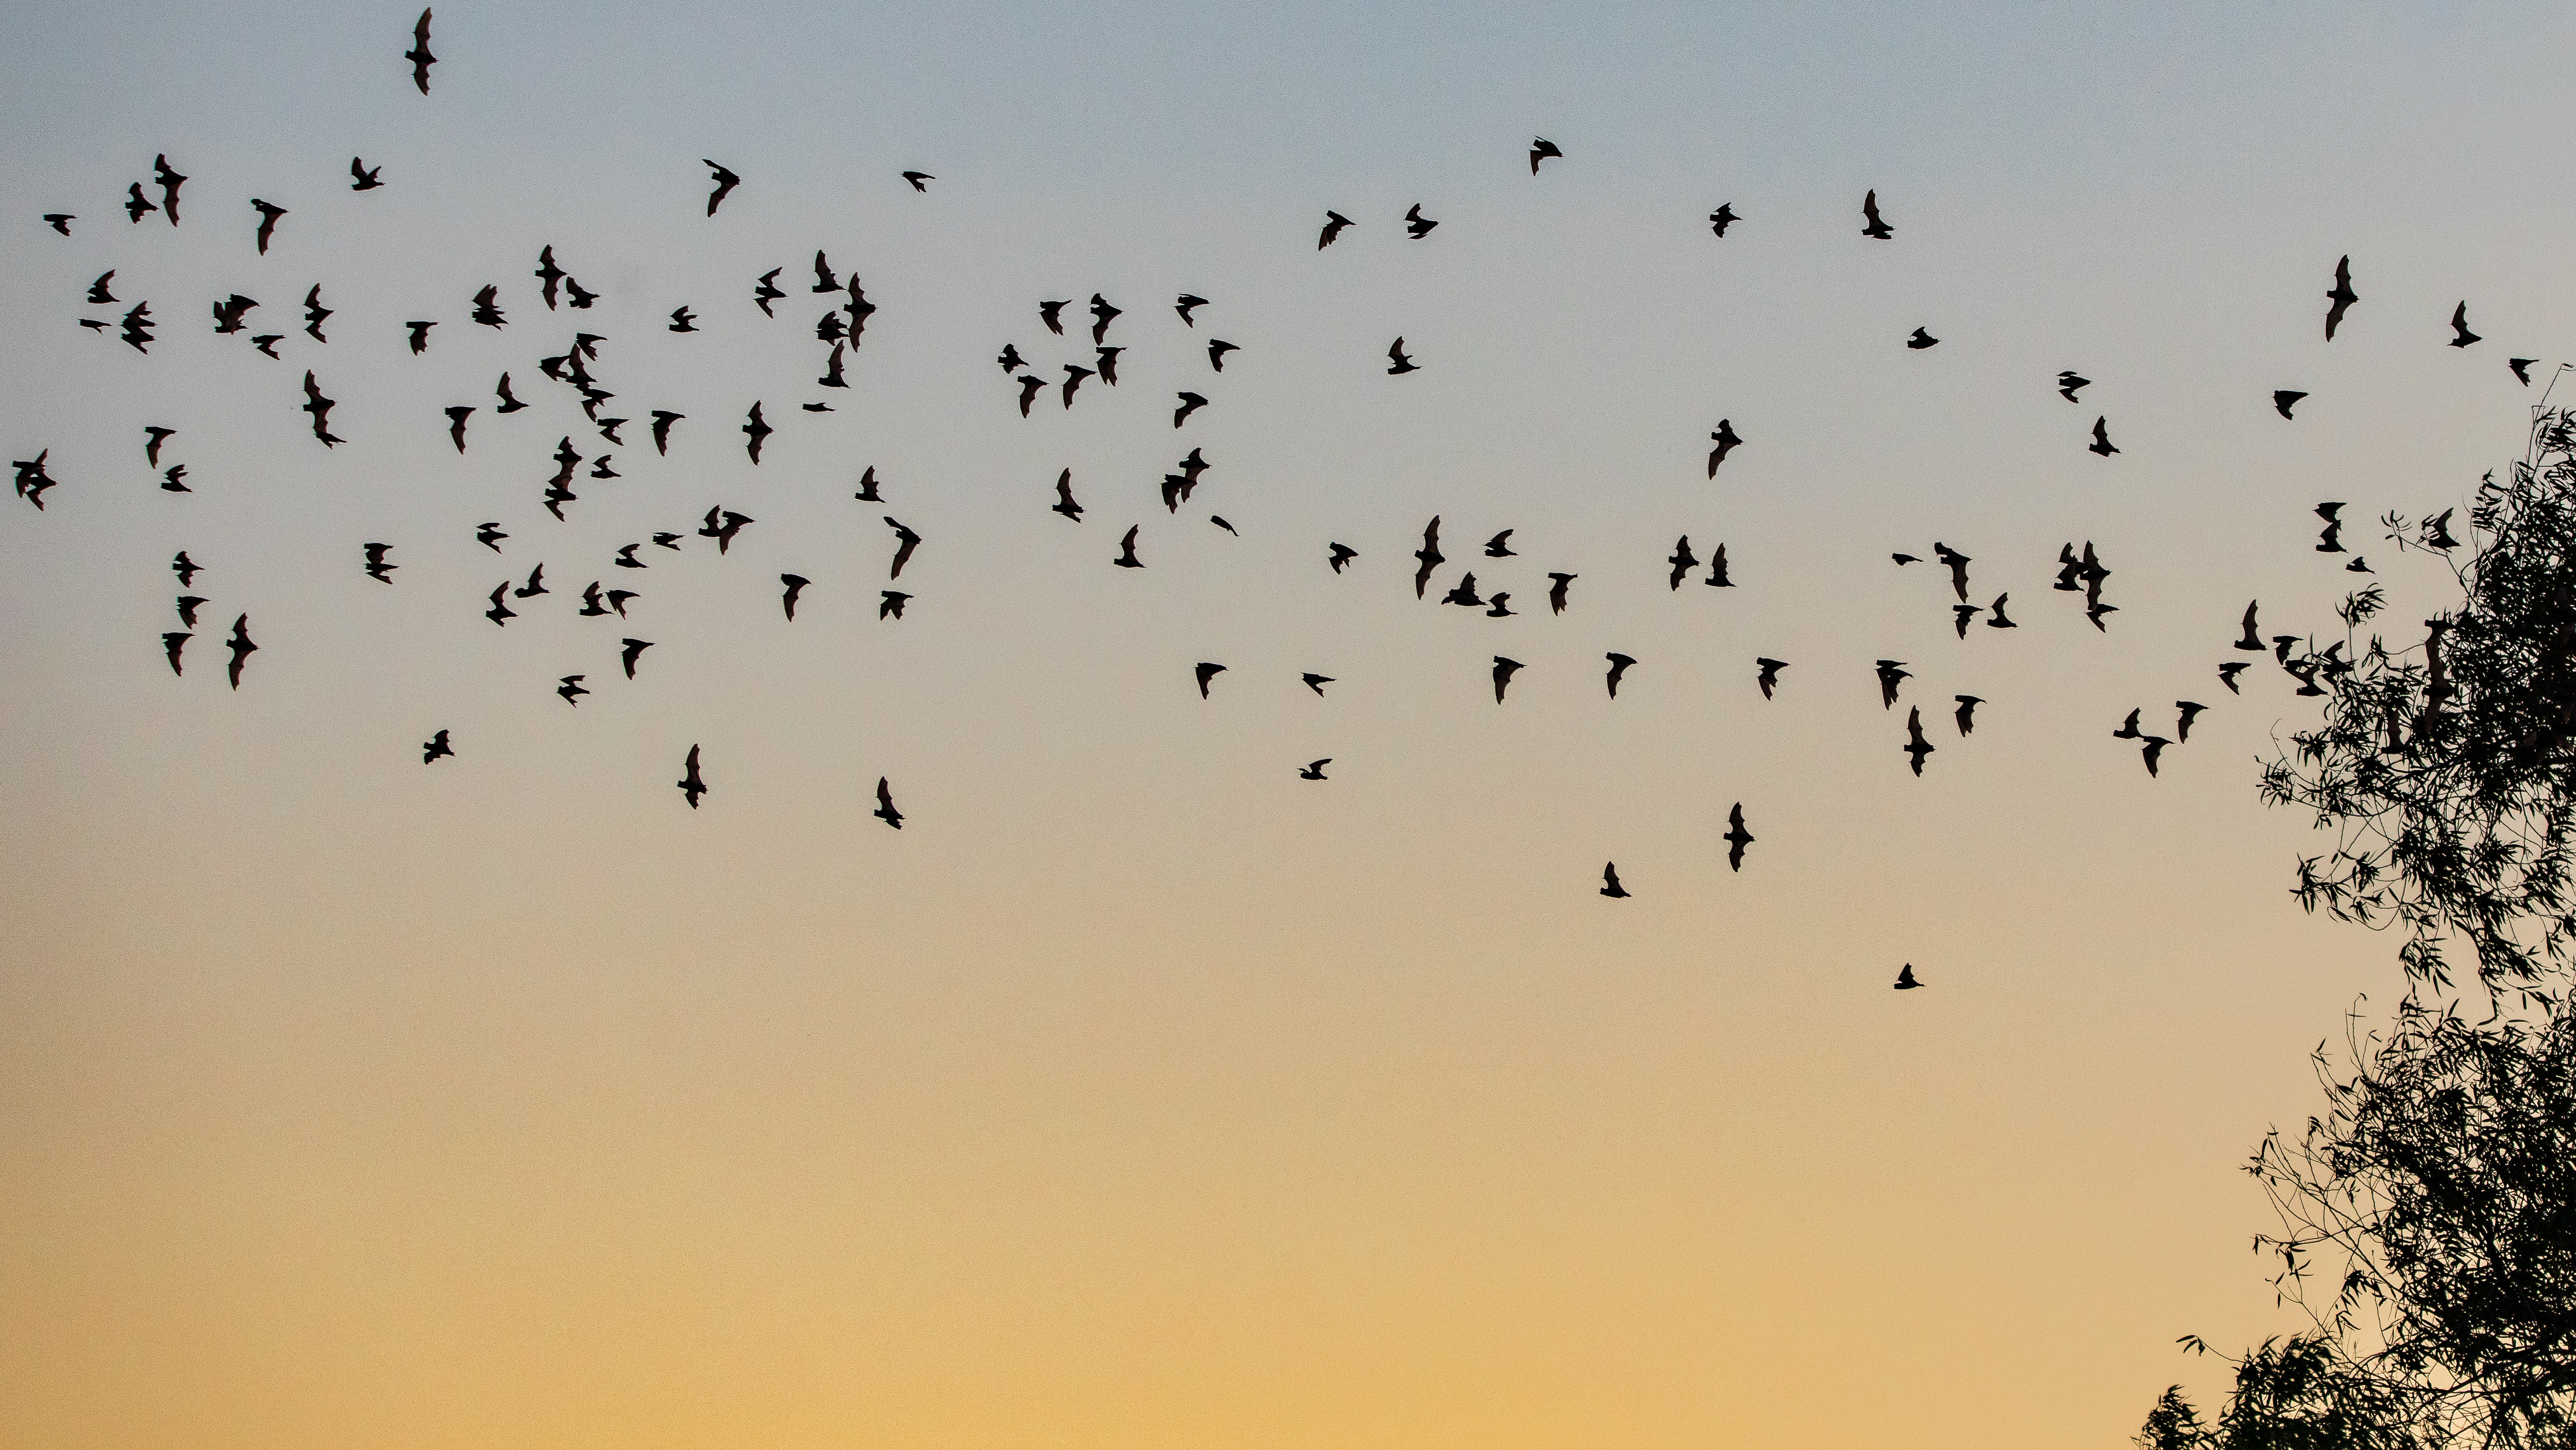 bats flying from a cave in YOLO Bypass Wildlife Area California